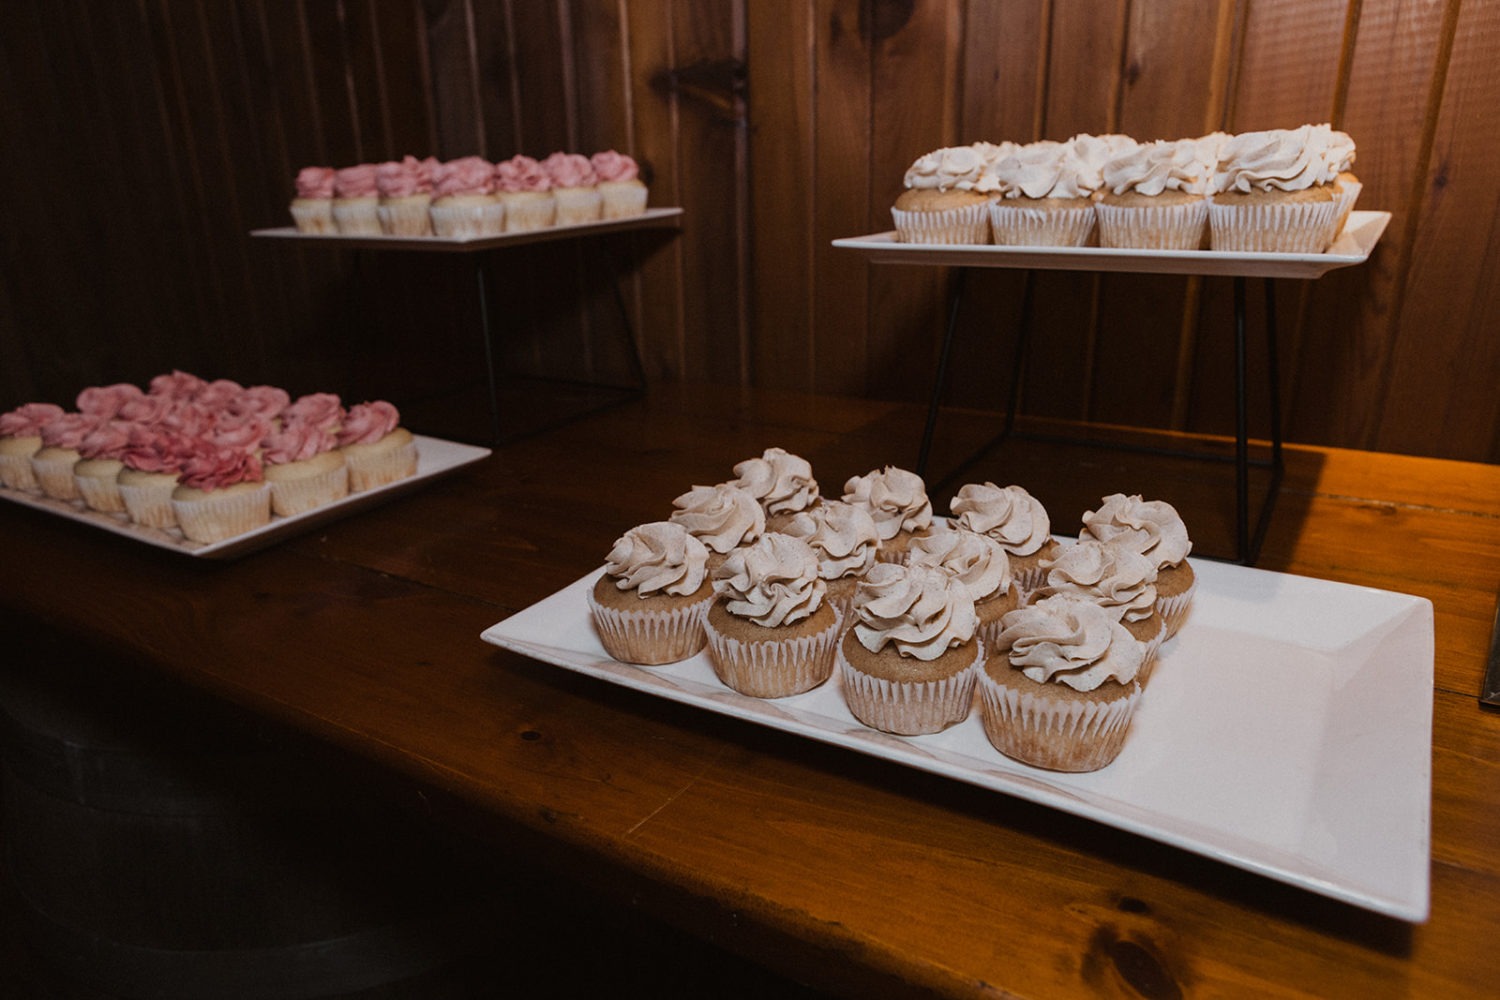 cupcakes on trays at wedding reception